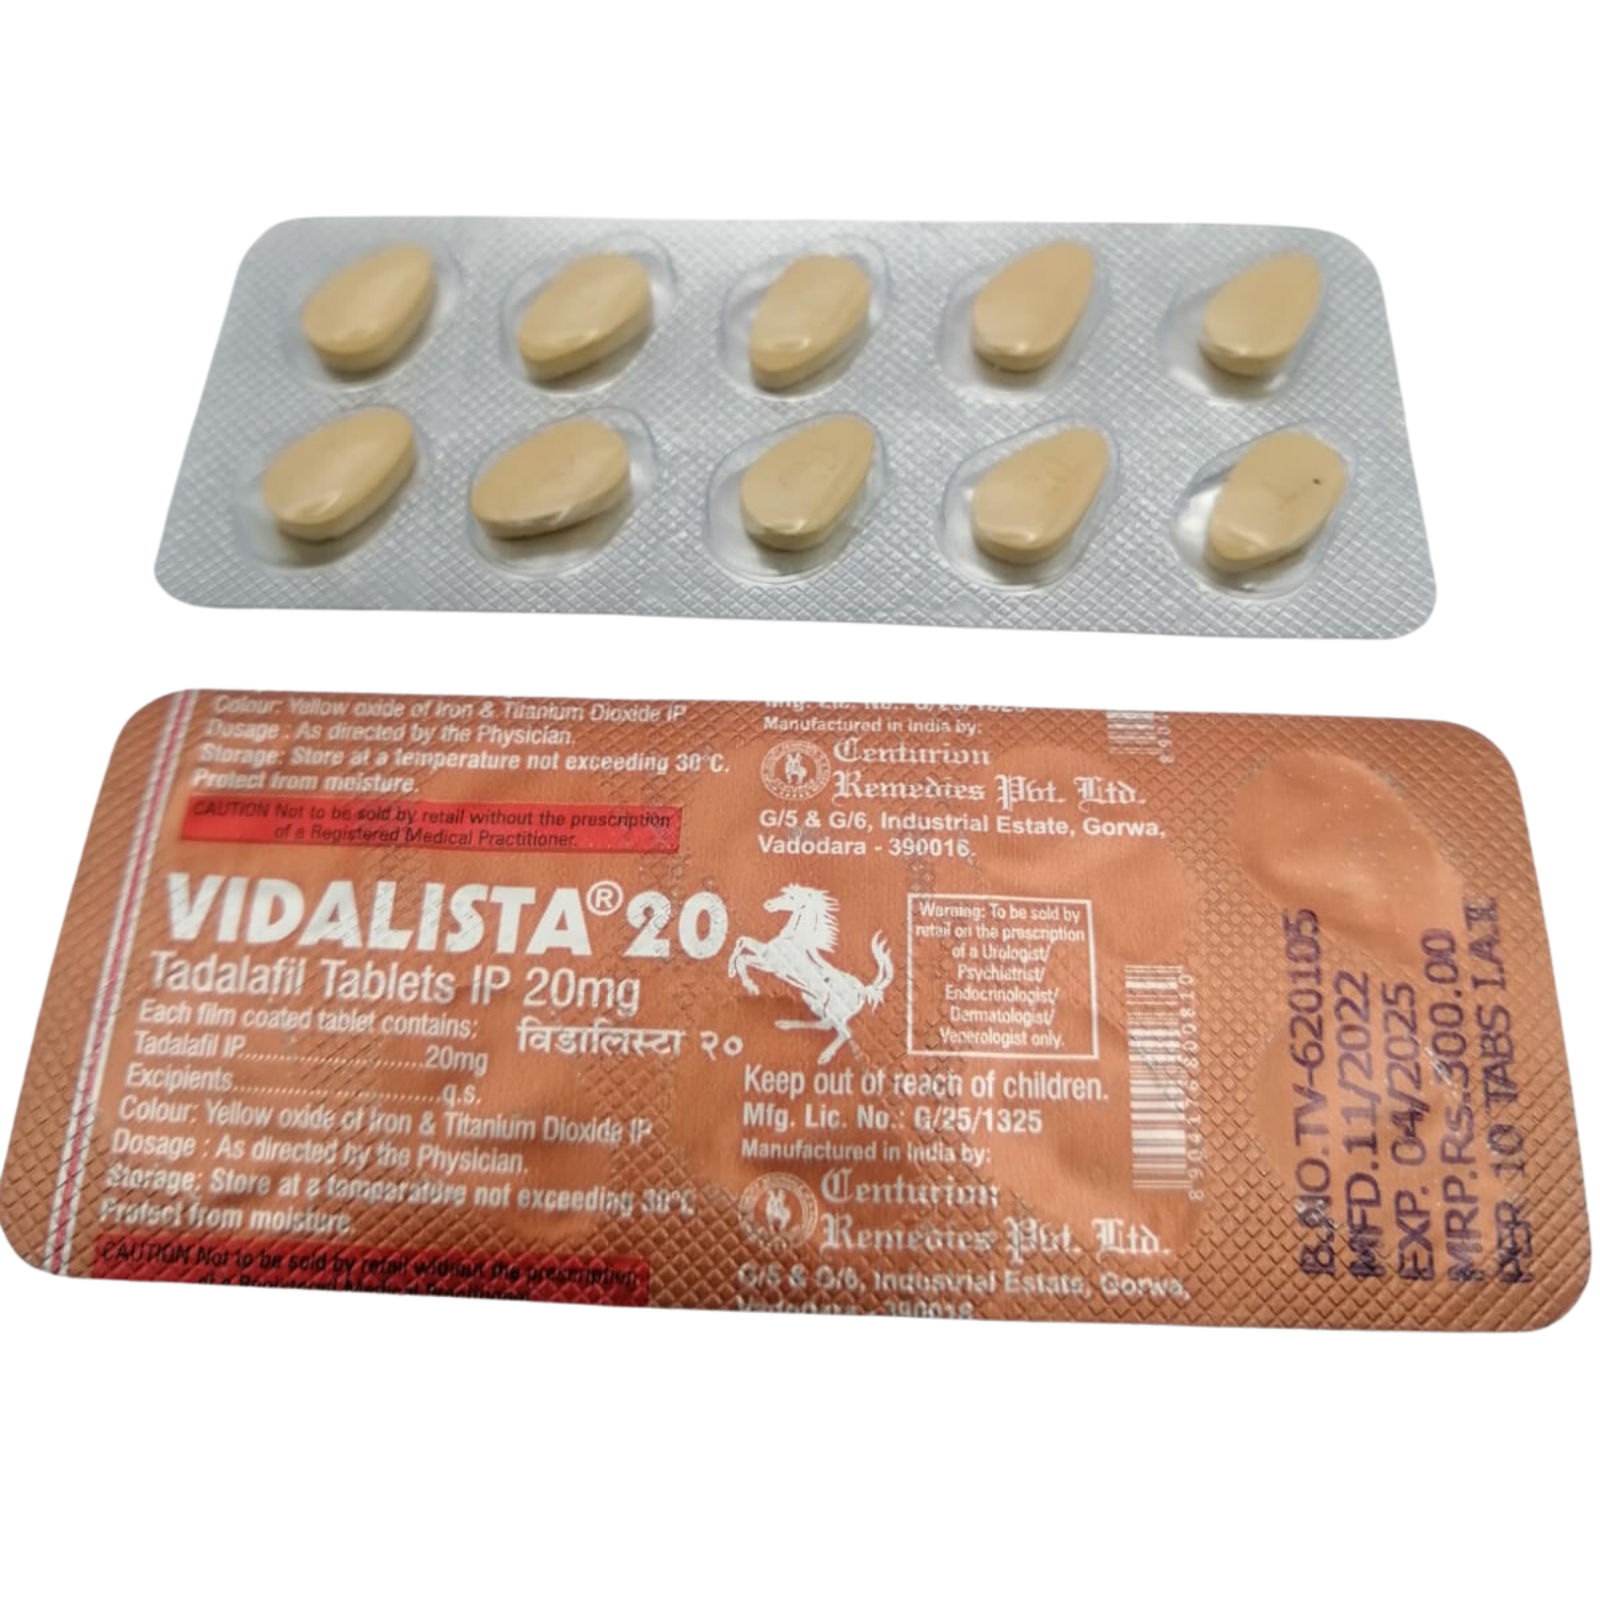 Vidalista 20mg Tadalafil Blister Pack with 10 Tablets for Erectile Dysfunction